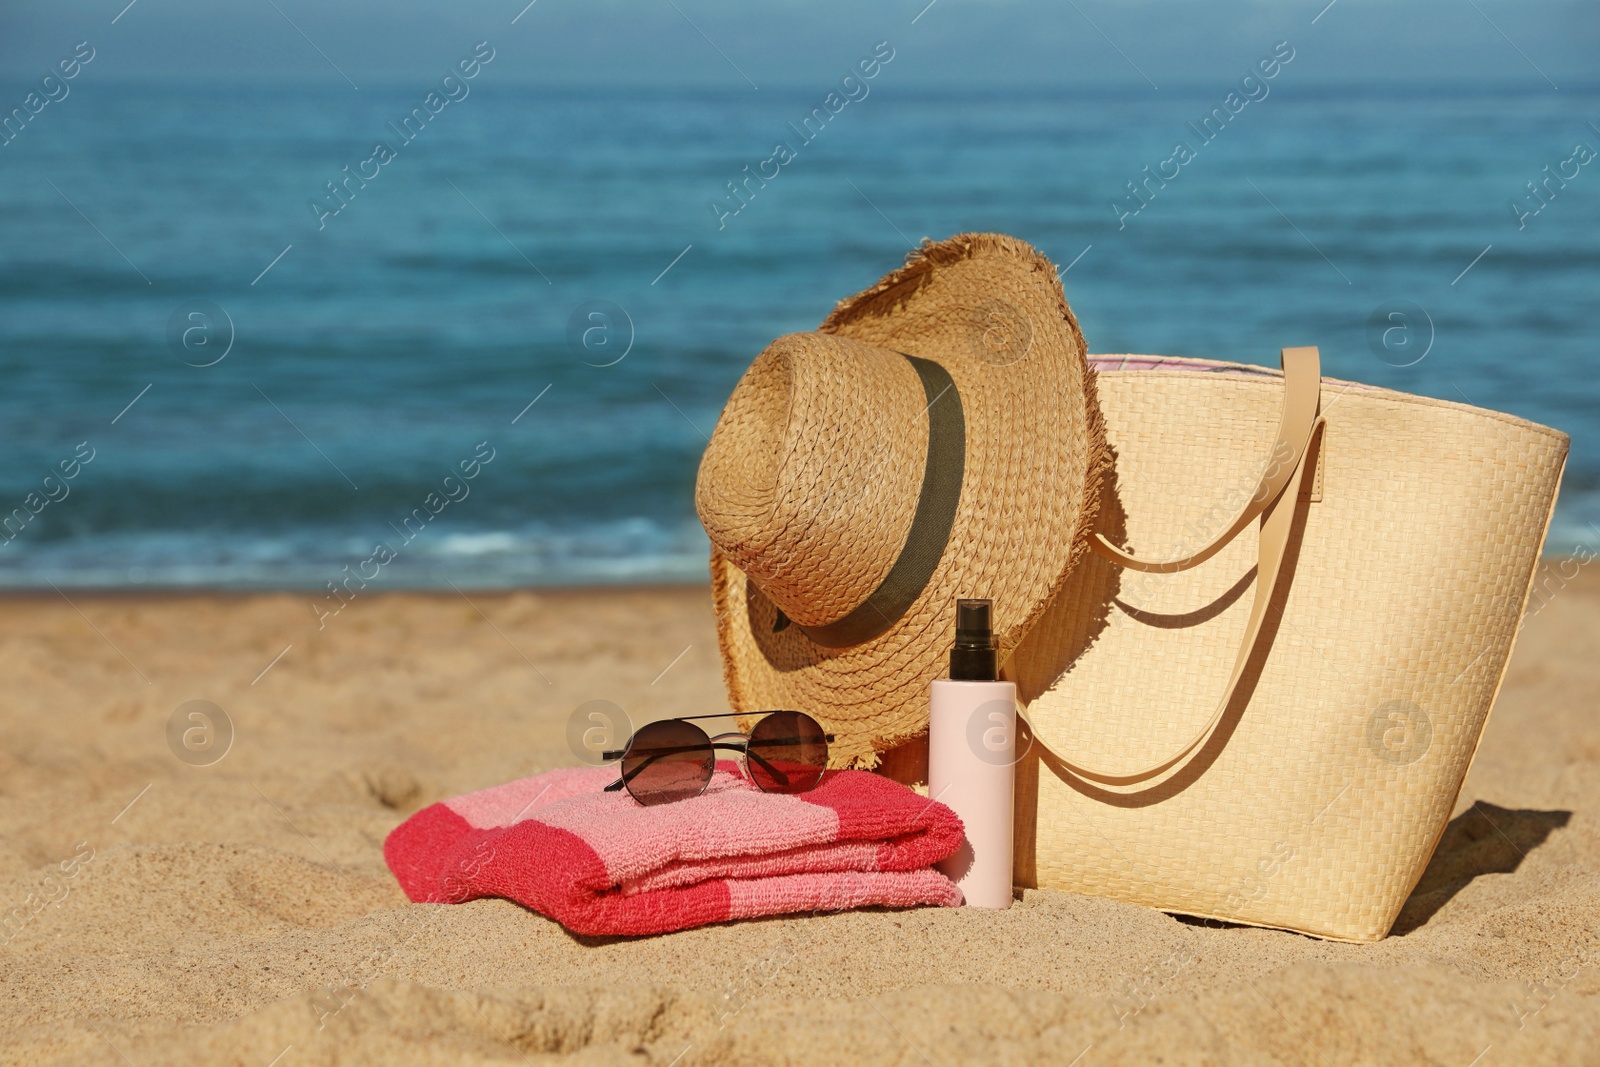 Photo of Straw hat, bag and other beach items on sandy seashore, space for text